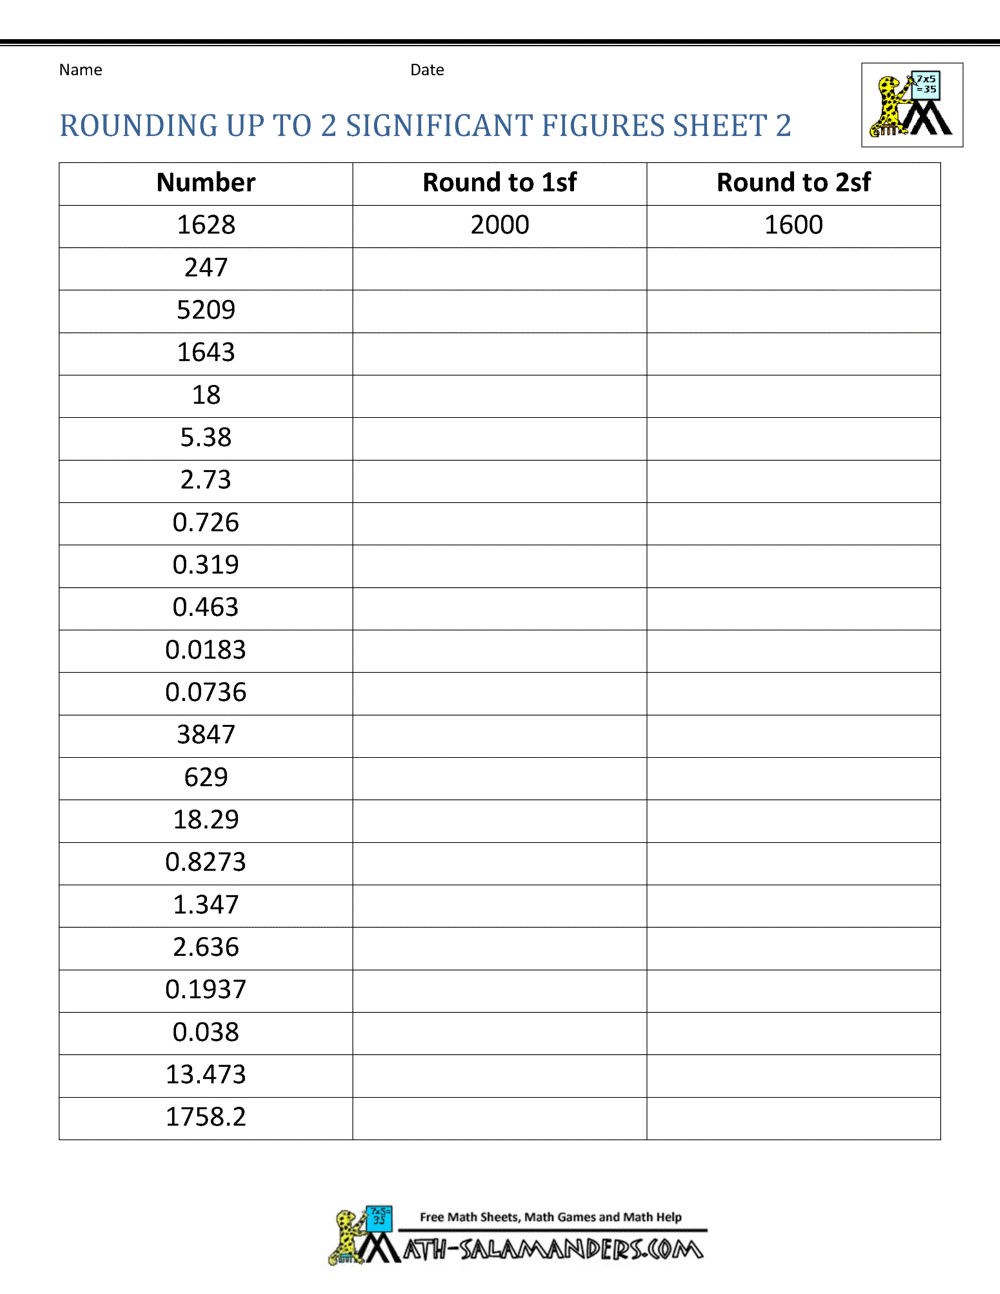 Rounding Significant Figures Within Significant Figures Worksheet Chemistry